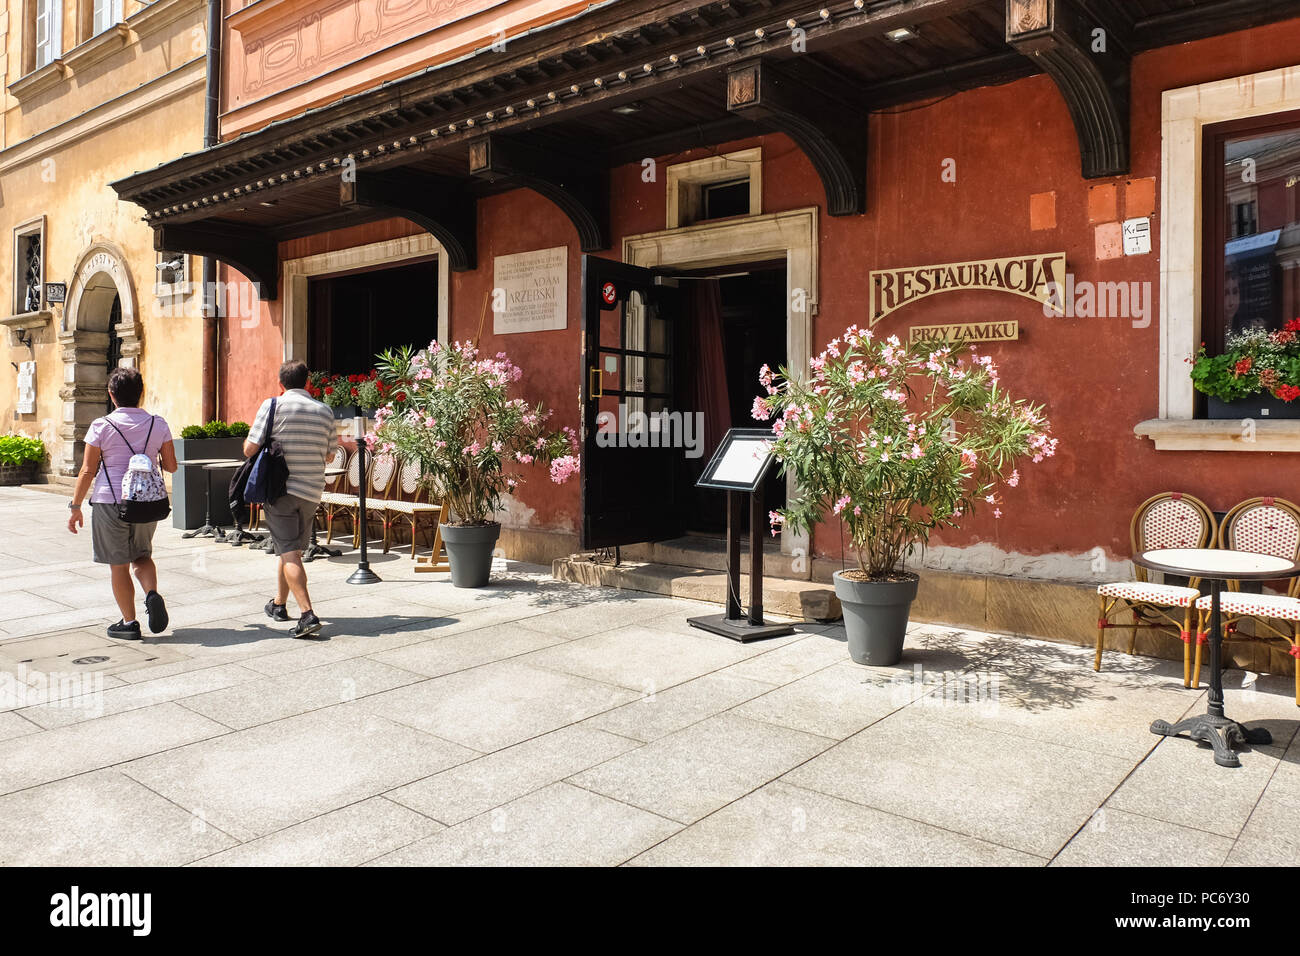 Warsaw, Poland - July 19, 2018: Restaurant near the Castle in an old town of Warsaw, Poland. Stock Photo